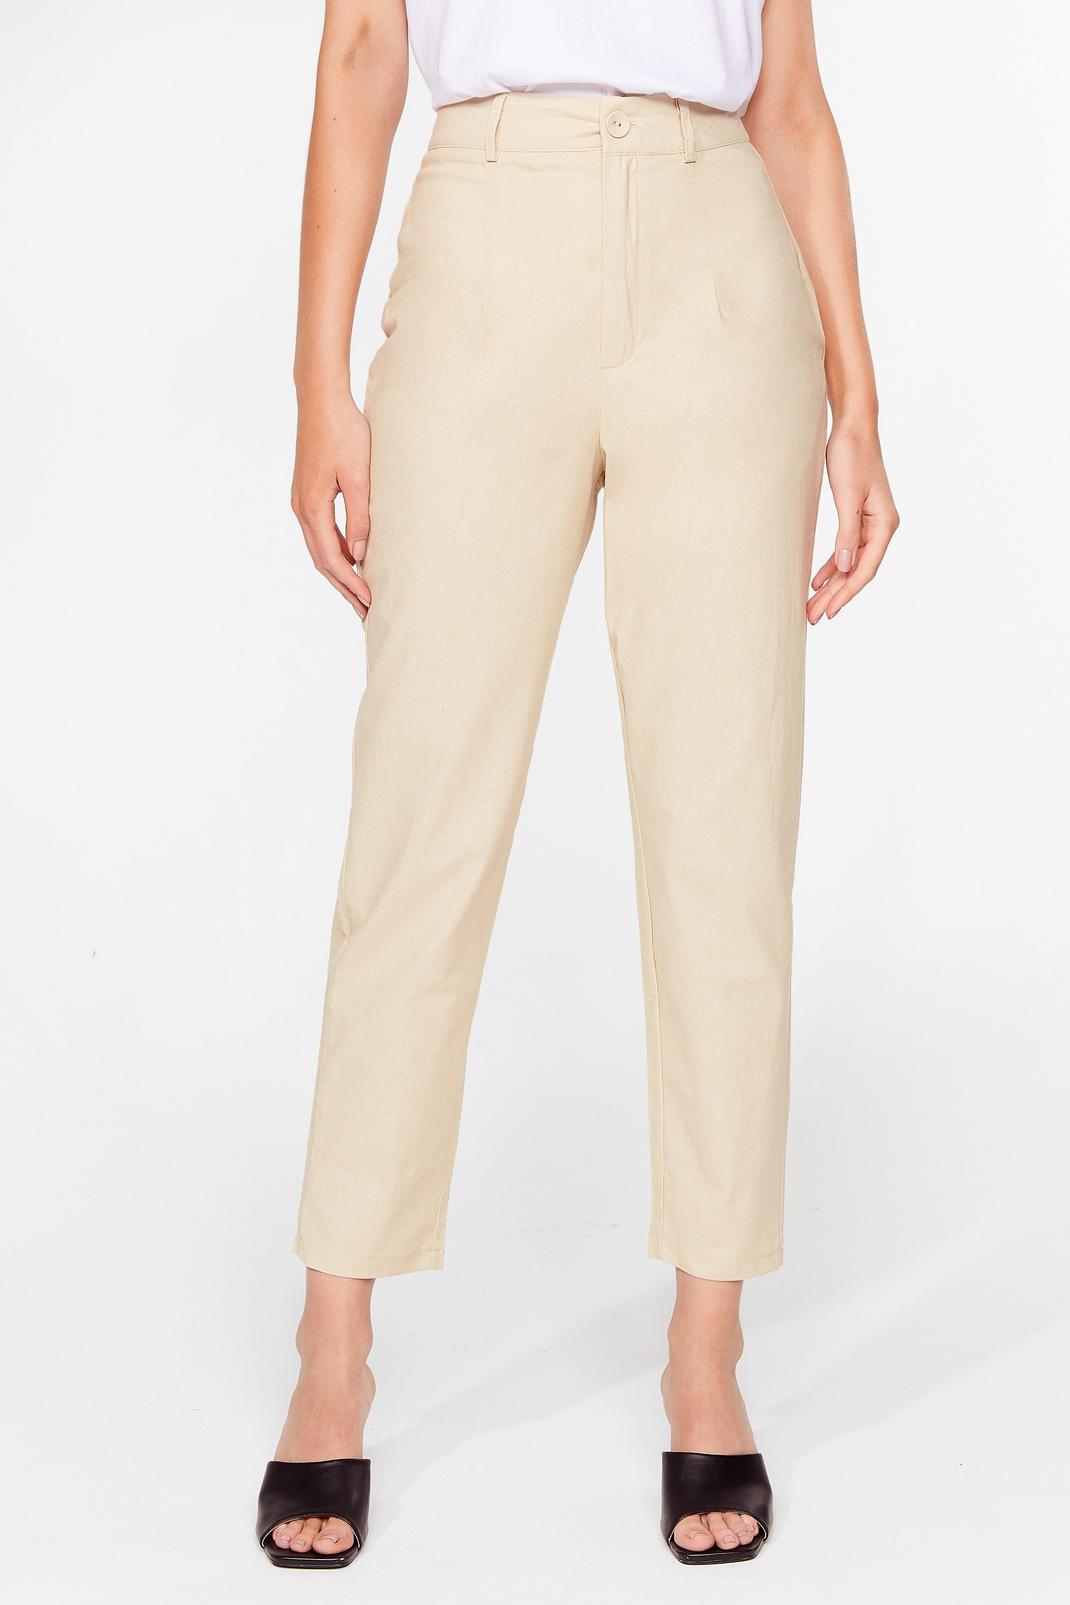 Taper a Chance on Me High-Waisted Trousers image number 1